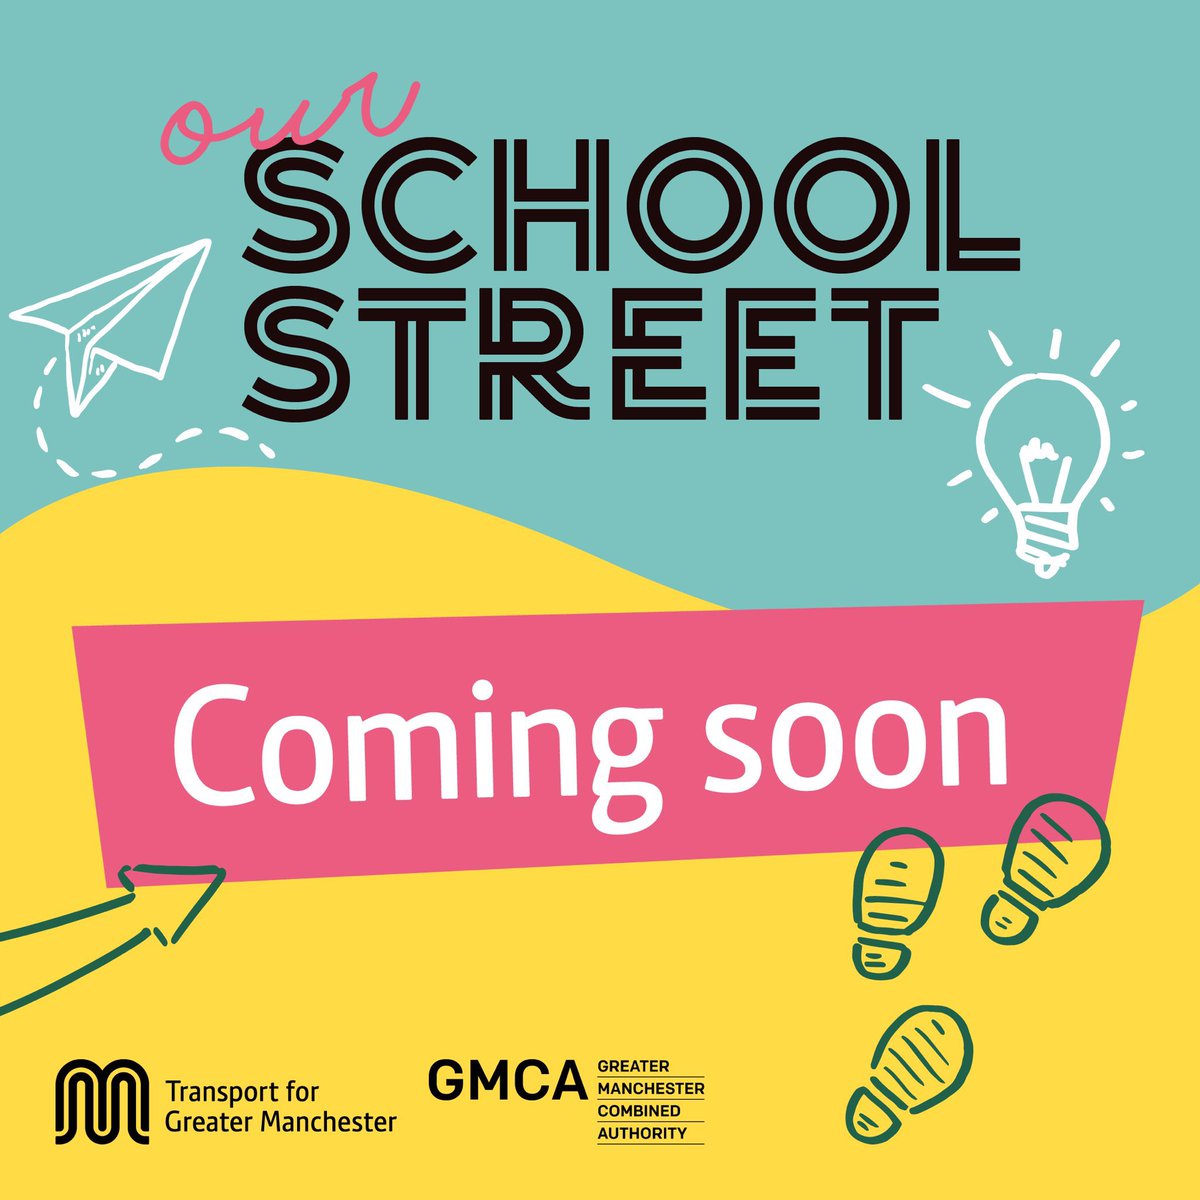 So pleased to support the #SchoolStreets trial at Brookburn Primary School #Chorlton. One of 7 trials across #Manchester. A great step forwards for a greener, safer, fairer future.🌱 Come to the meeting tomorrow if you are a local resident & want to know more. See you there.